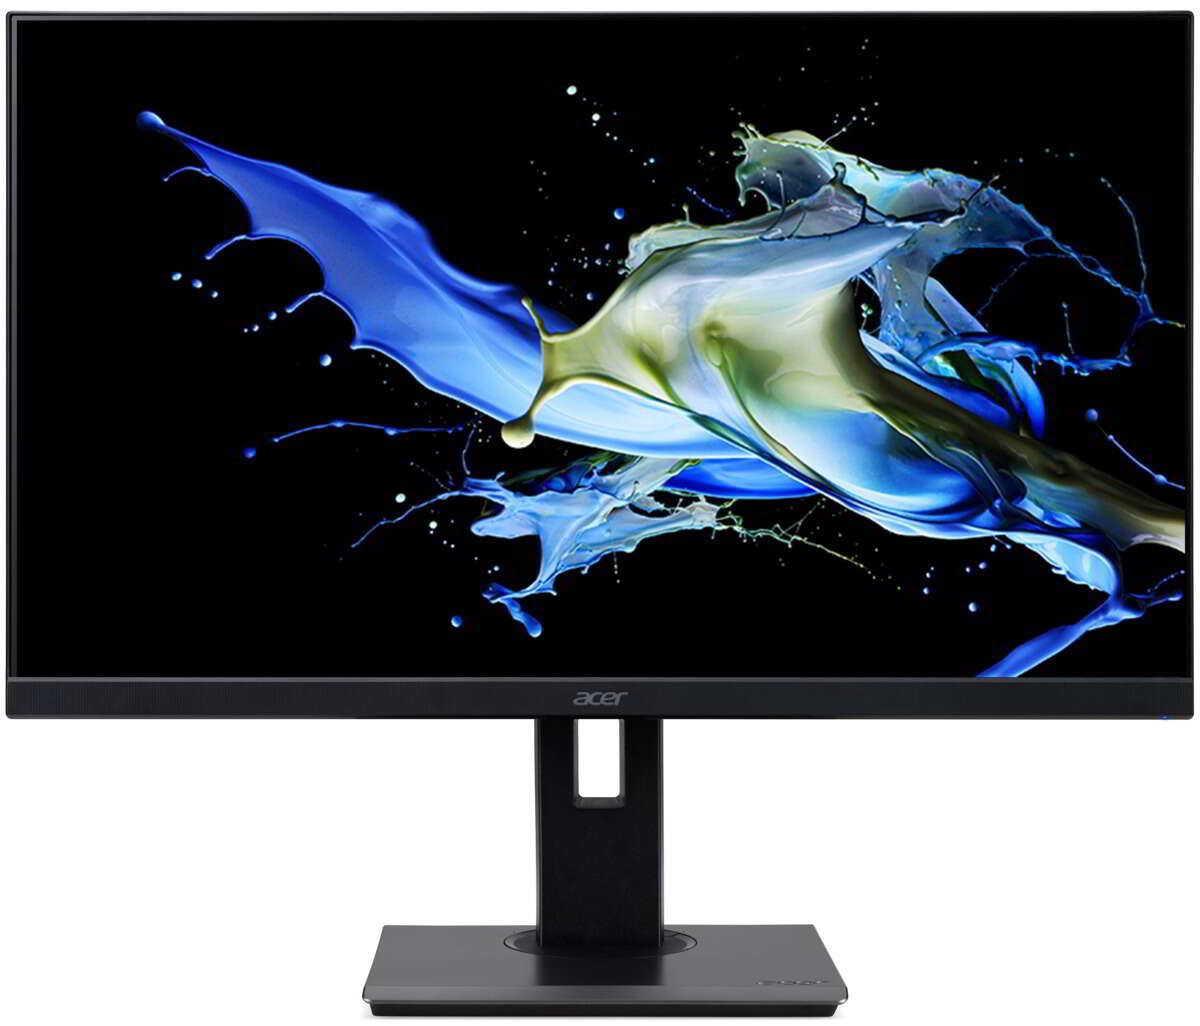 Acer 24" b247wbmiprx monitor